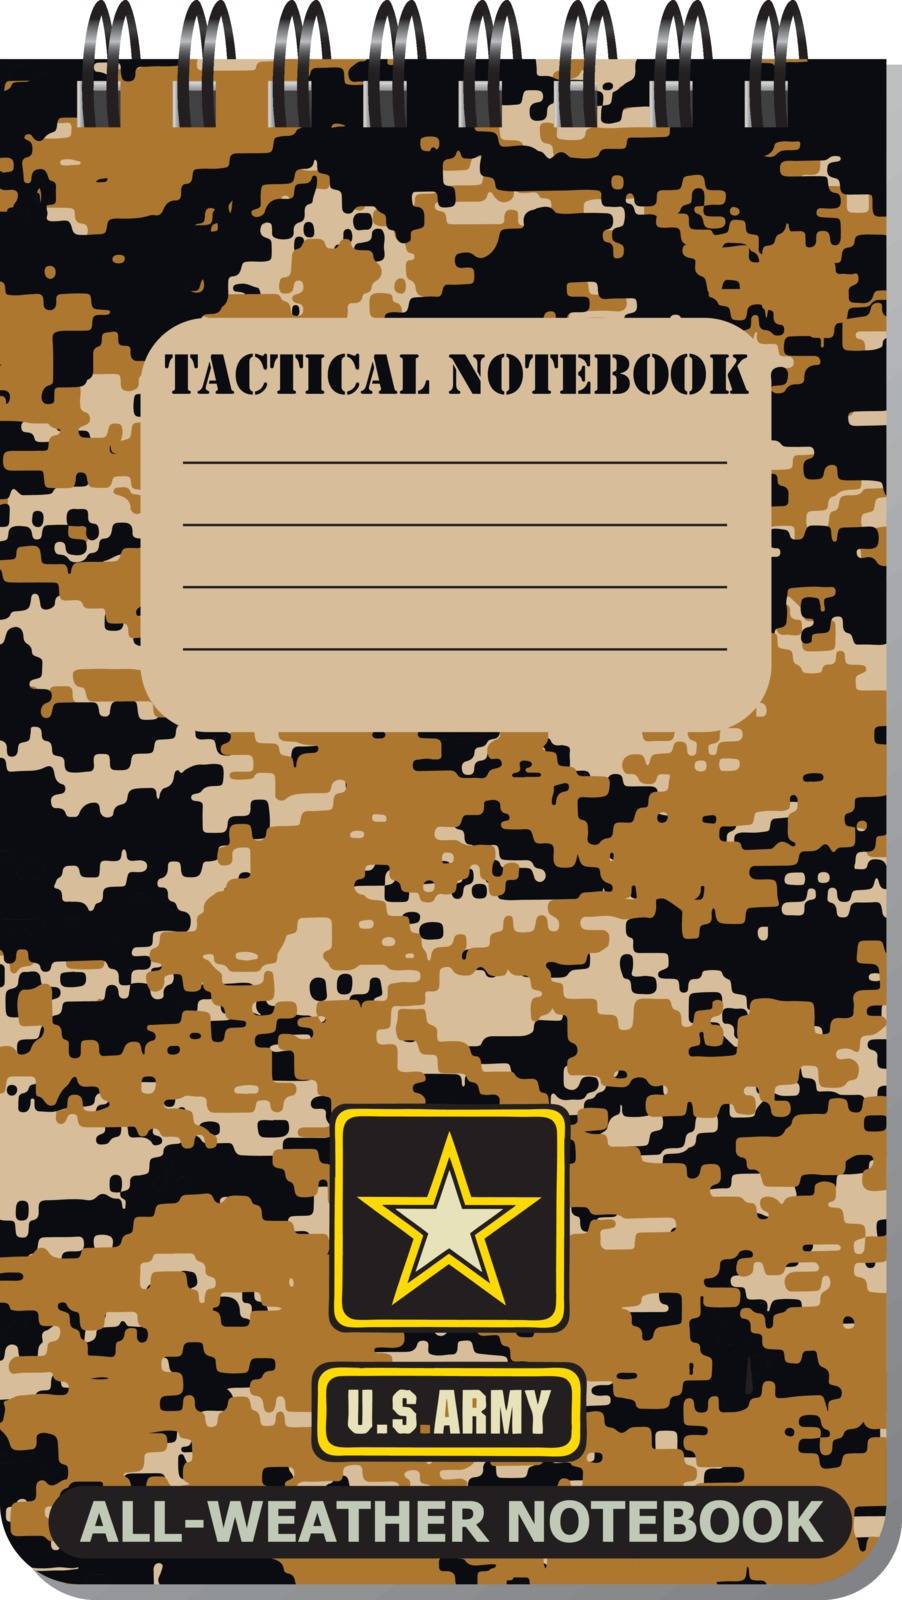 Tactical notebook for the army by VIPDesignUSA